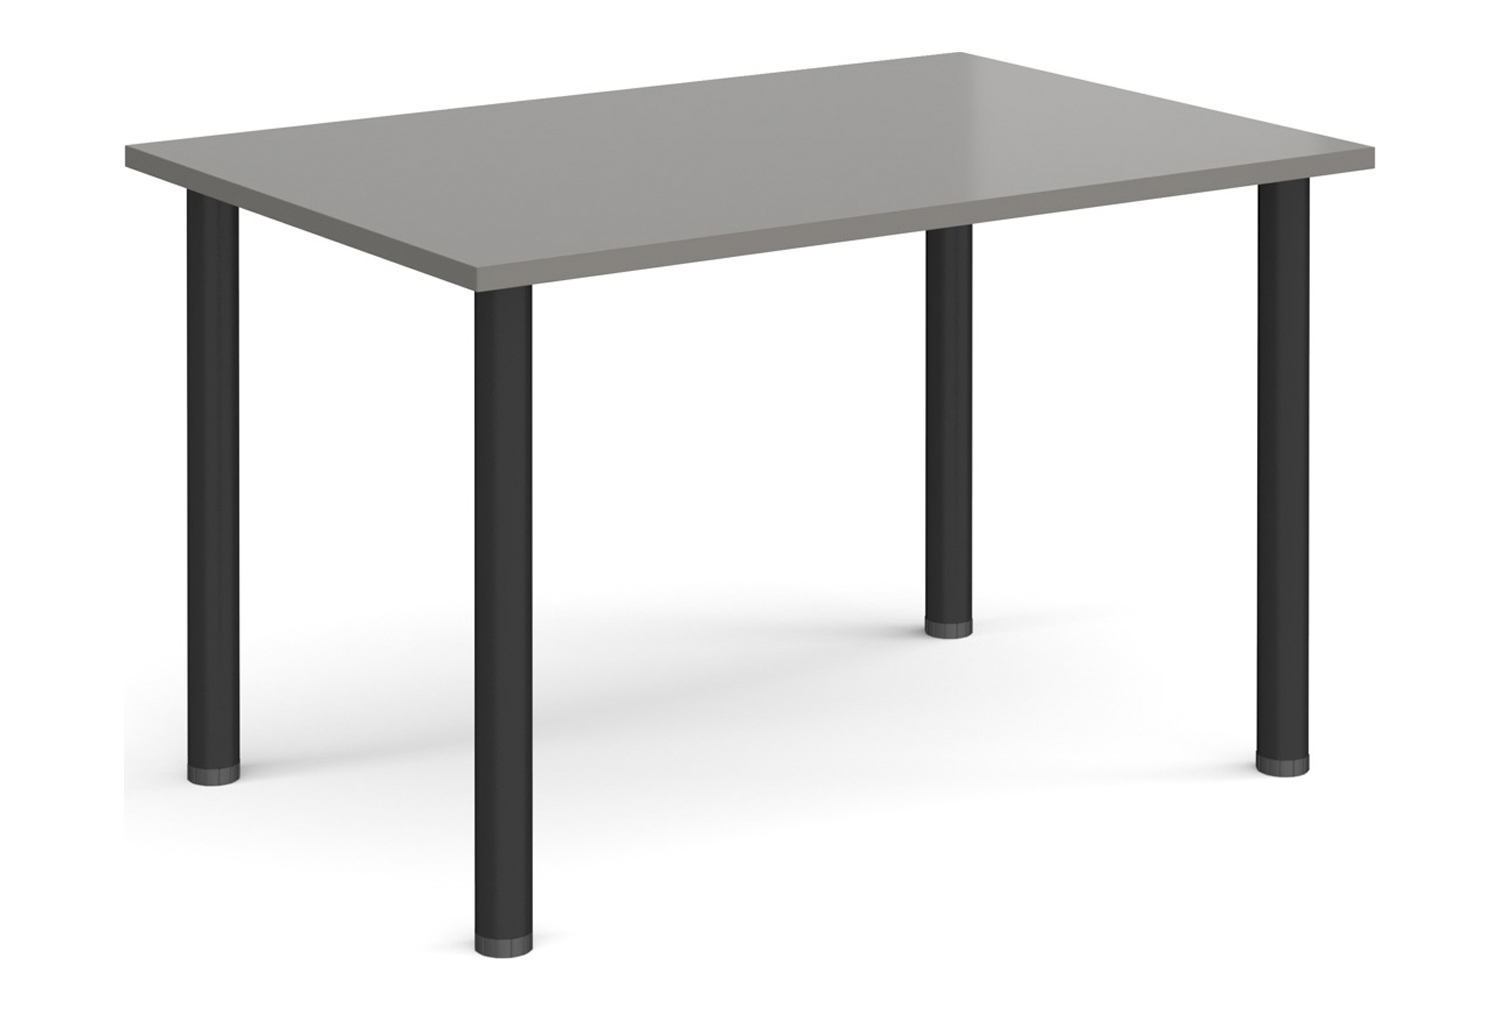 Pallas Rectangular Meeting Table, 120wx80dx73h (cm), Black Frame, Onyx Grey, Express Delivery